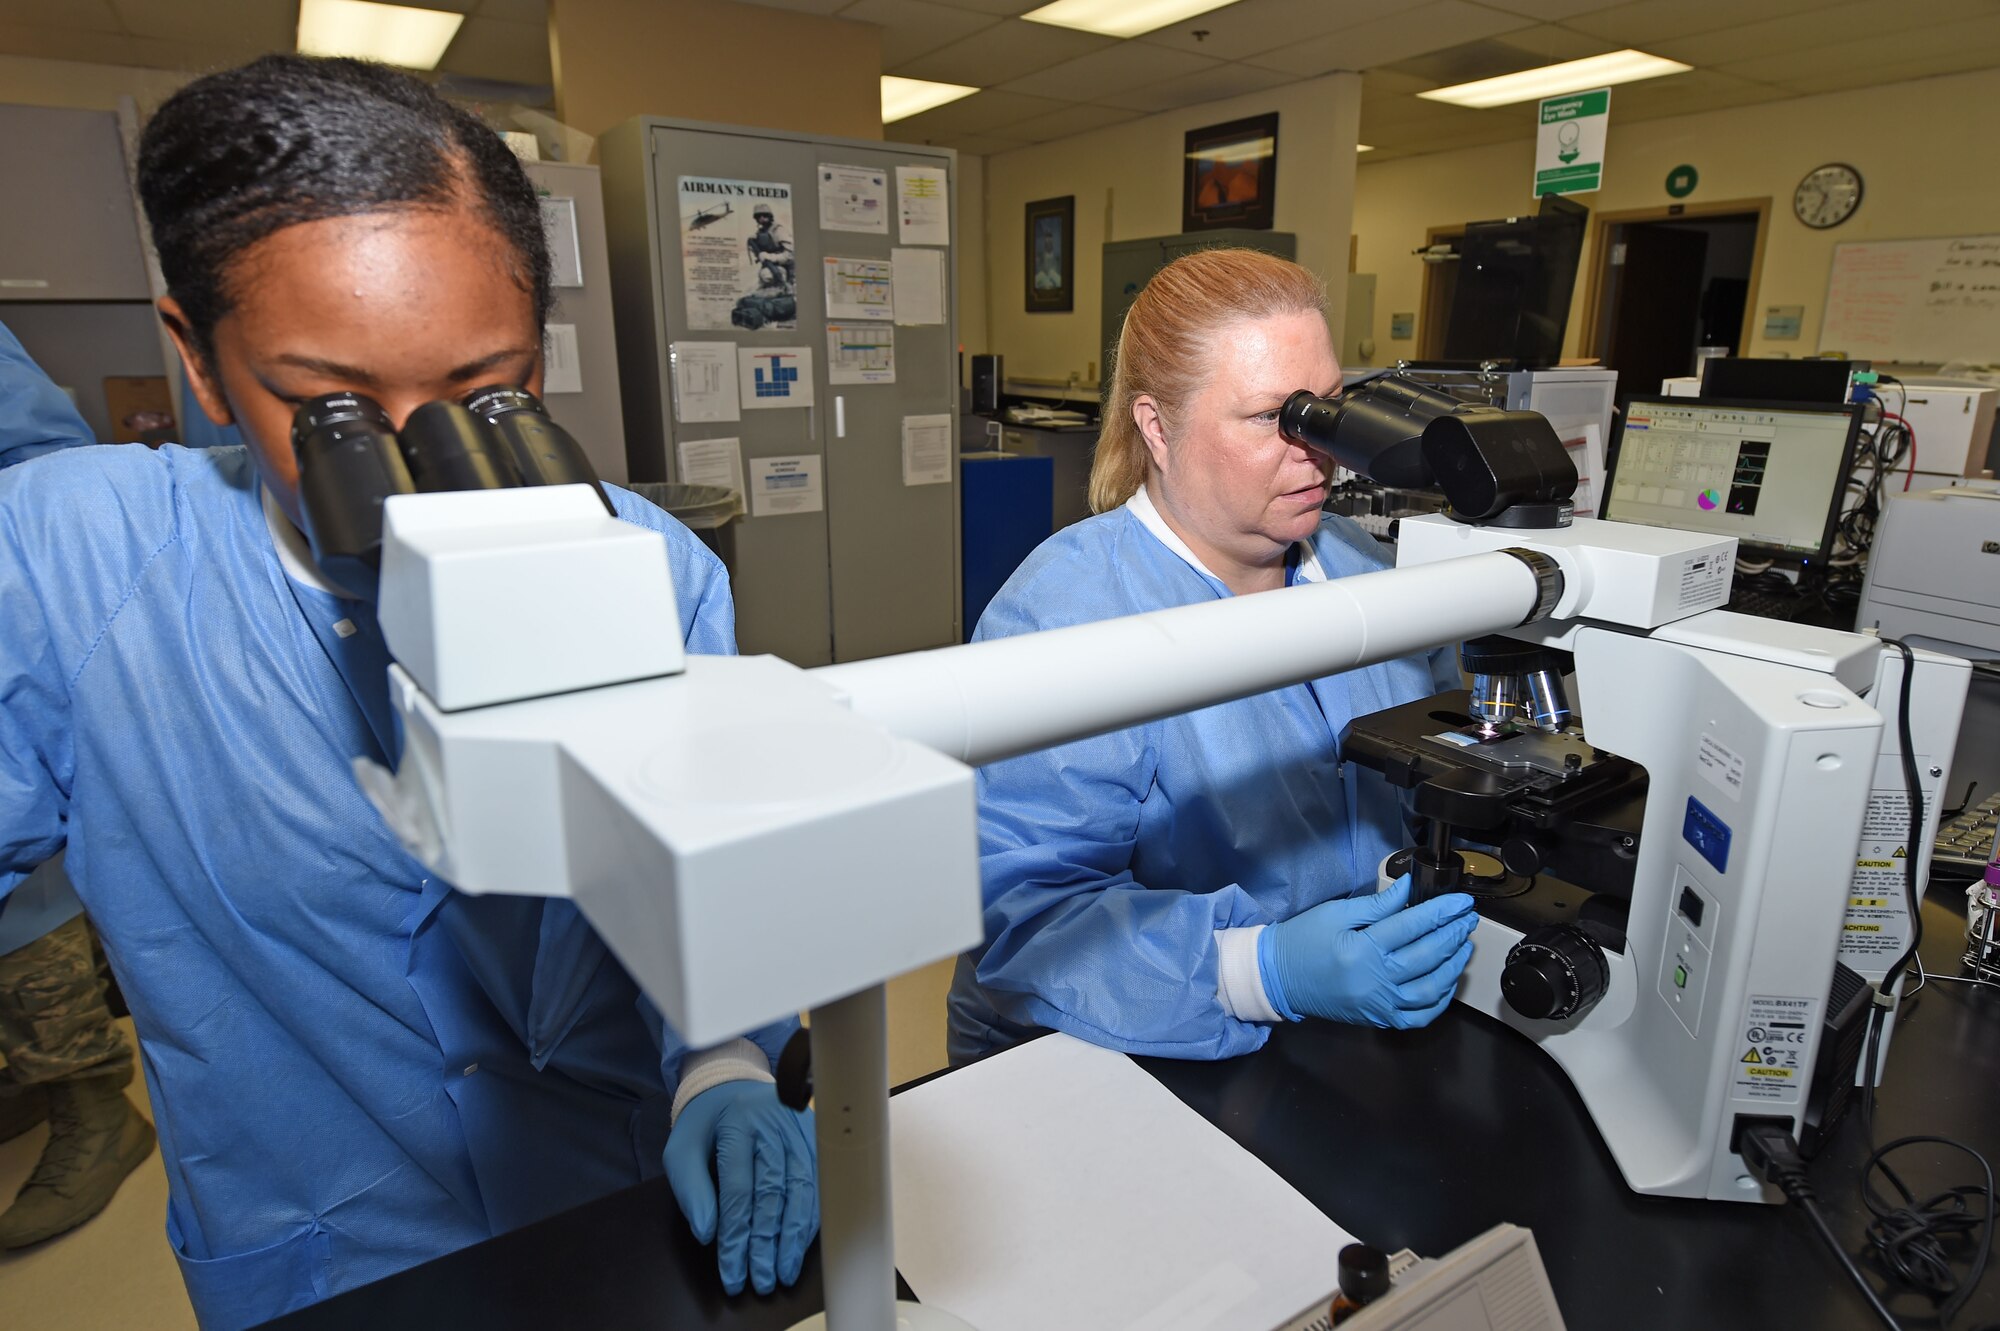 Deanna Adams and Airman 1st Class Cierra Barden, 359th Clinical Laboratory and Radiology Flight medical lab technicians, inspect a blood smear for abnormal cells with a compound microscope at the 359th Medical Group lab at Joint Base San Antonio-Randolph, Texas, Sept. 16, 2016. The compound microscope features an extra viewer to allow for training as well as simultaneous review by technicians. (U.S. Air Force photo/Tech. Sgt. Christopher Carwile/Released)